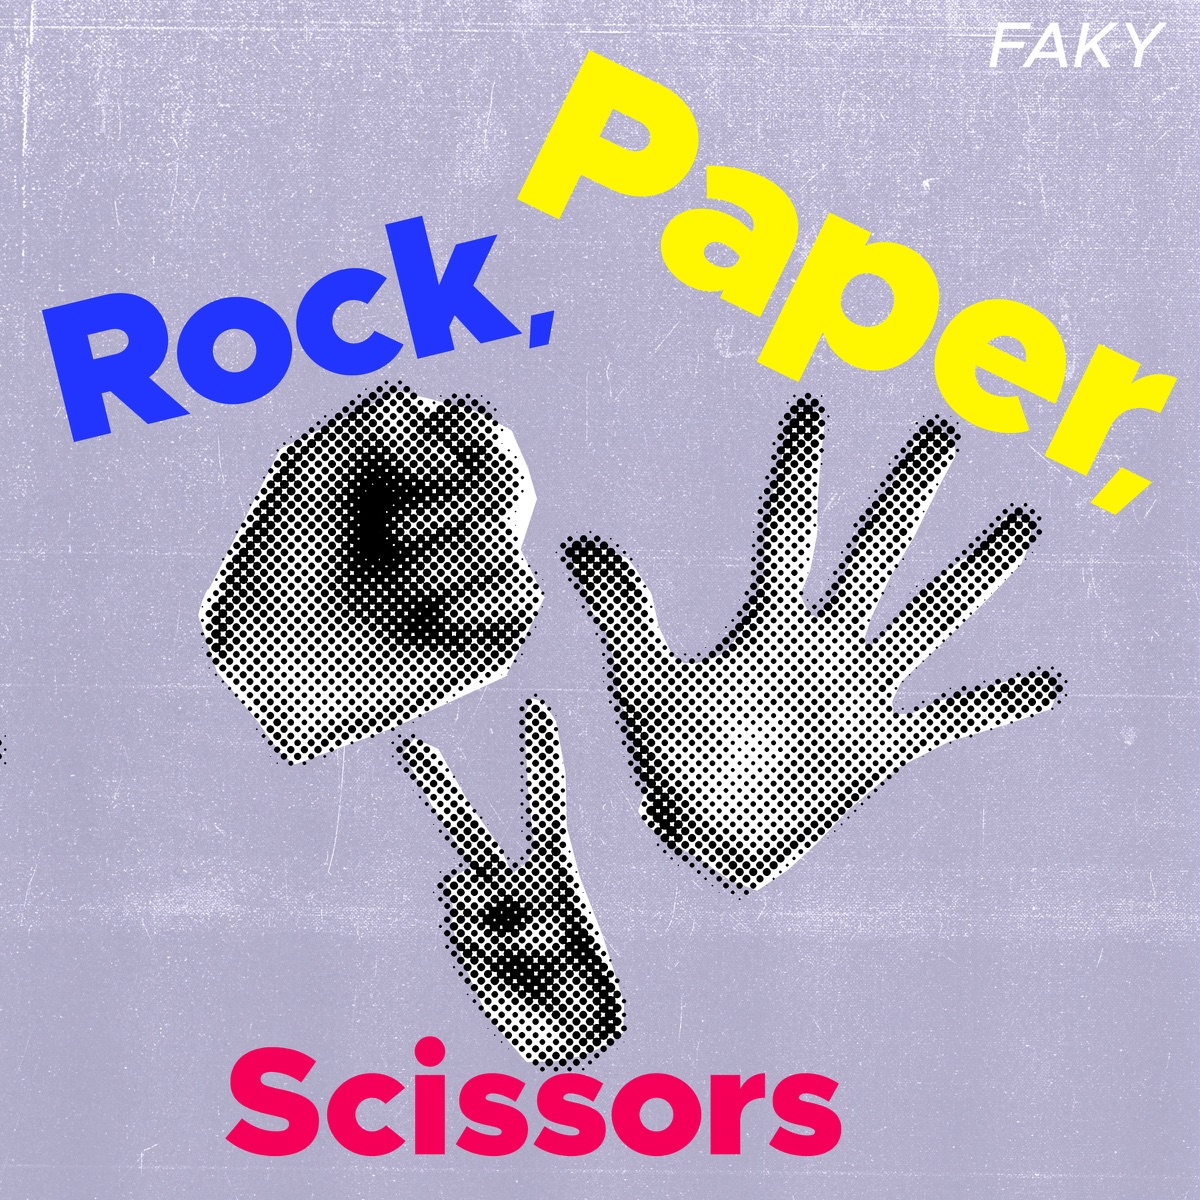 Cover art for『FAKY - Rock, Paper, Scissors』from the release『Rock, Paper, Scissors